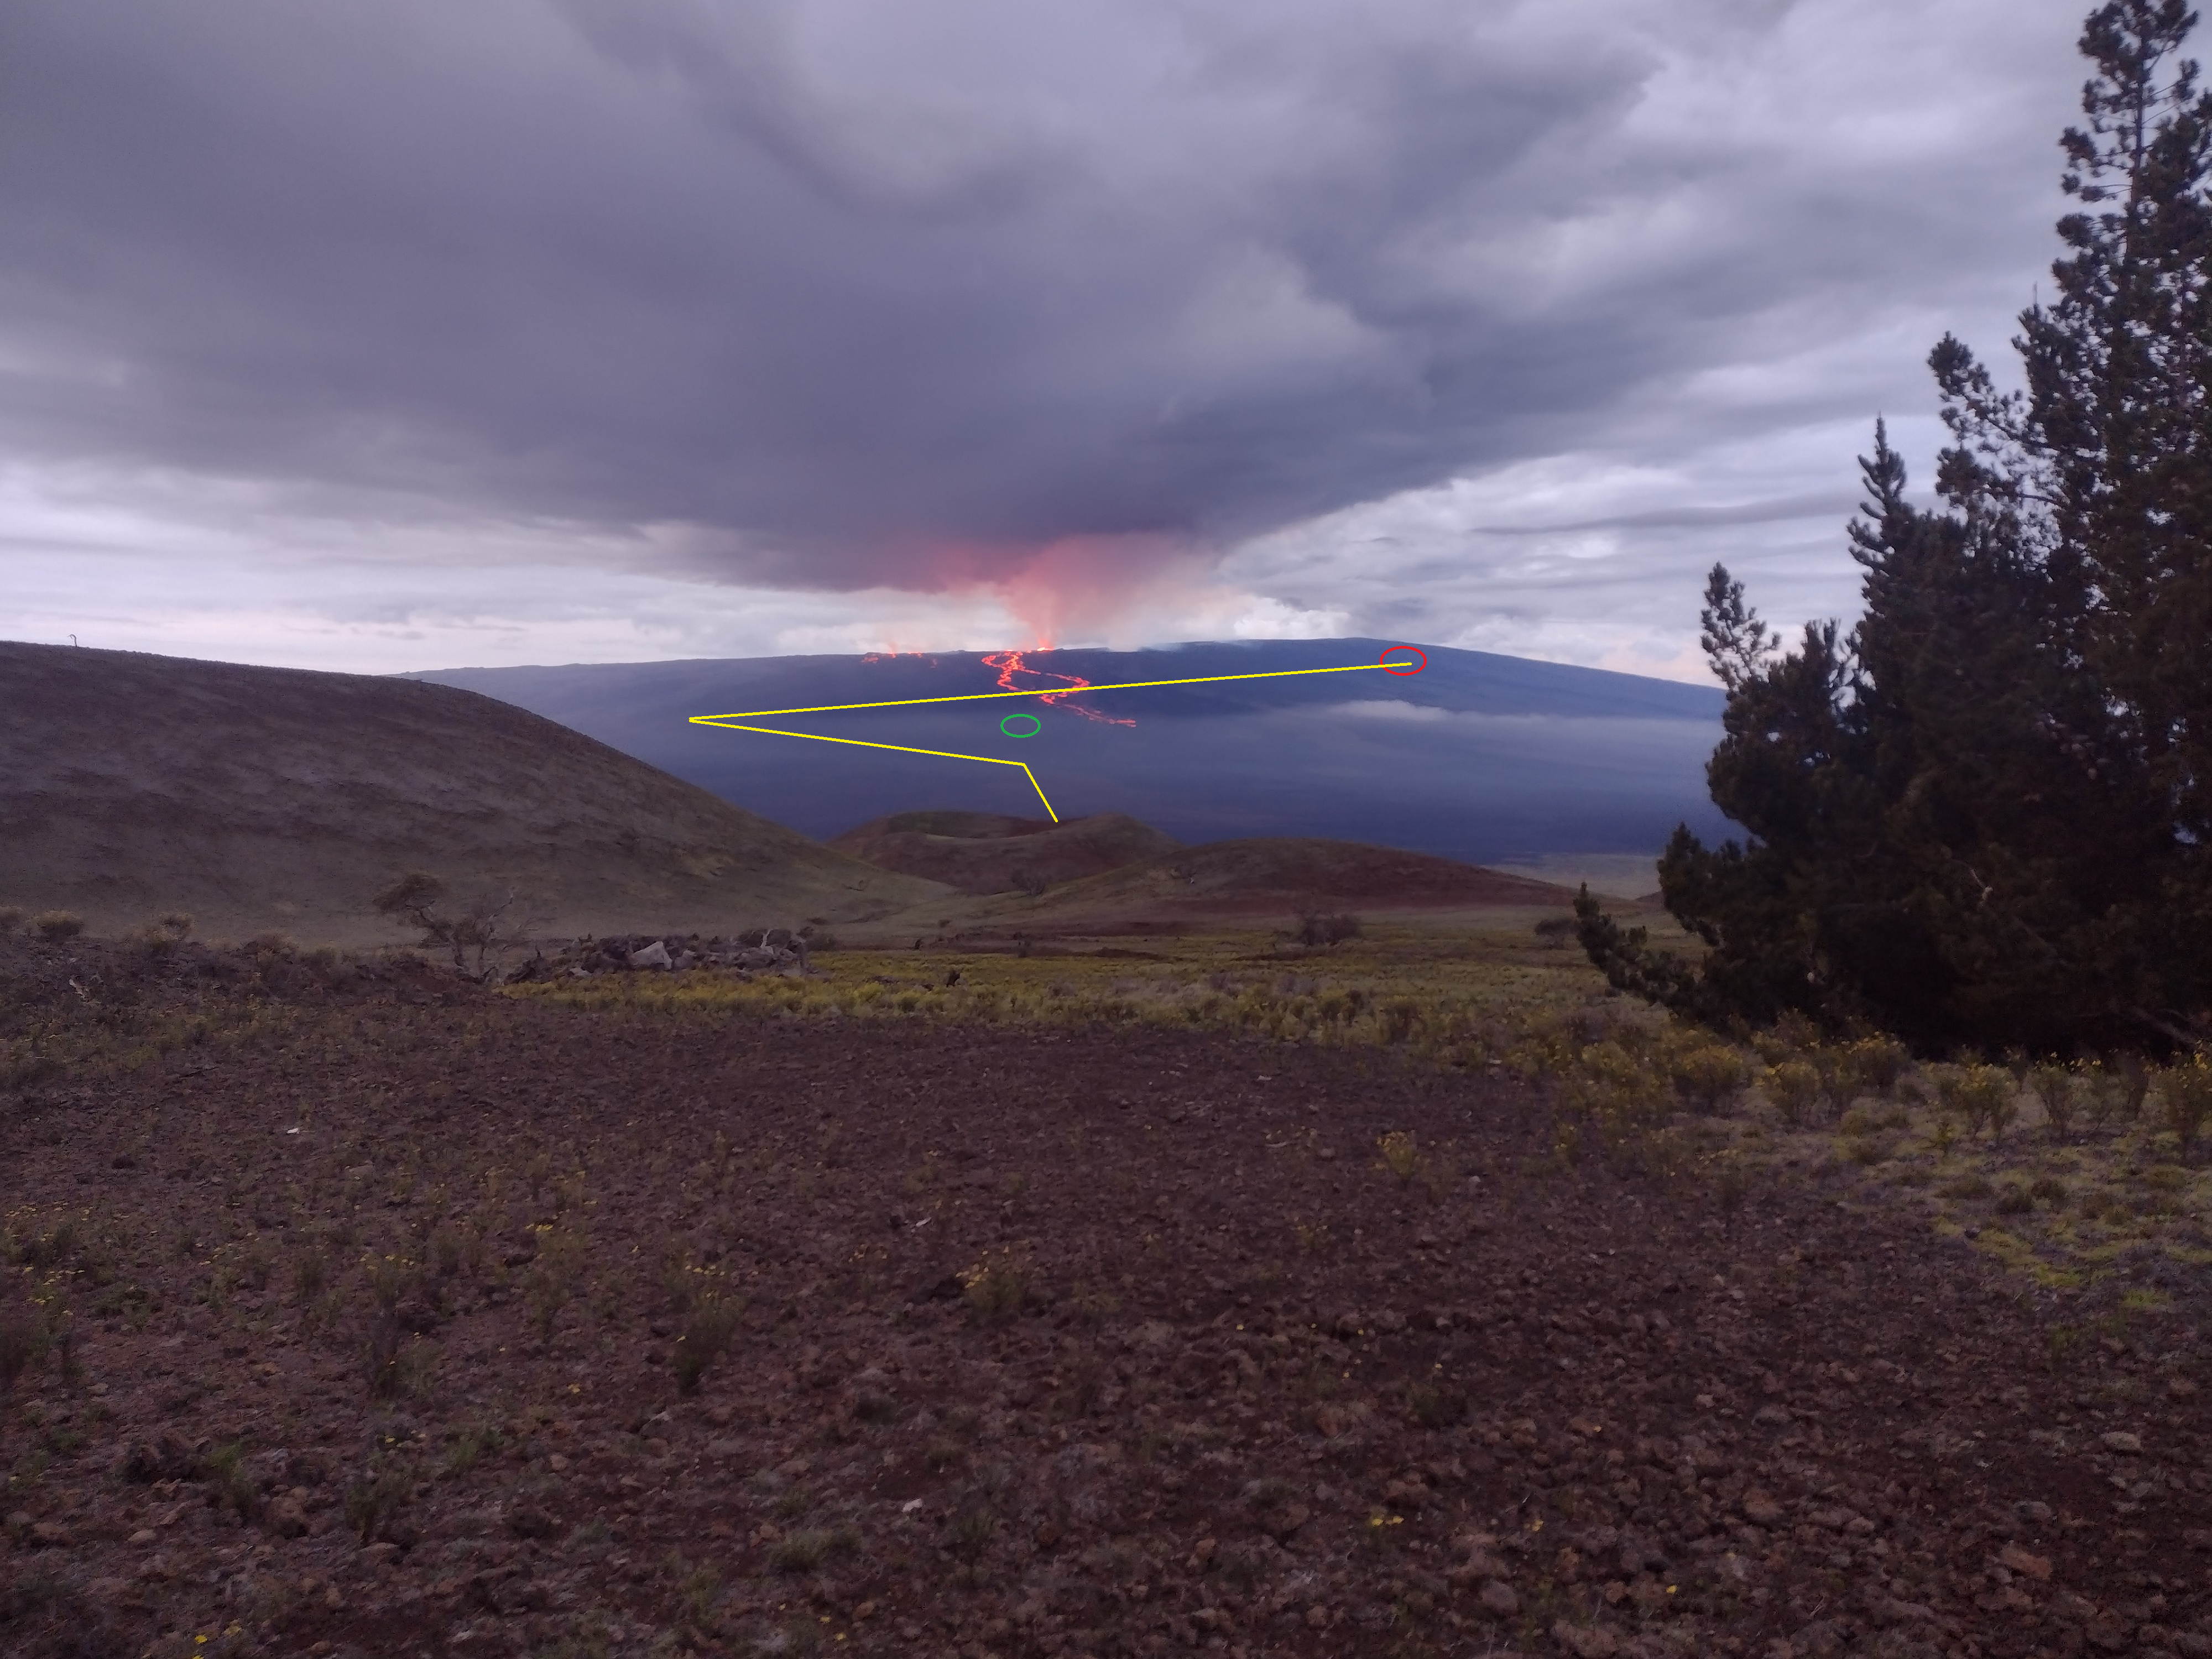 Image of lava flows from the morning of 11/29 annotated with path of Mauna Loa access road (yellow) to MLSO (red circle) and site of Hi-Seas Mars Habitat (green circle)